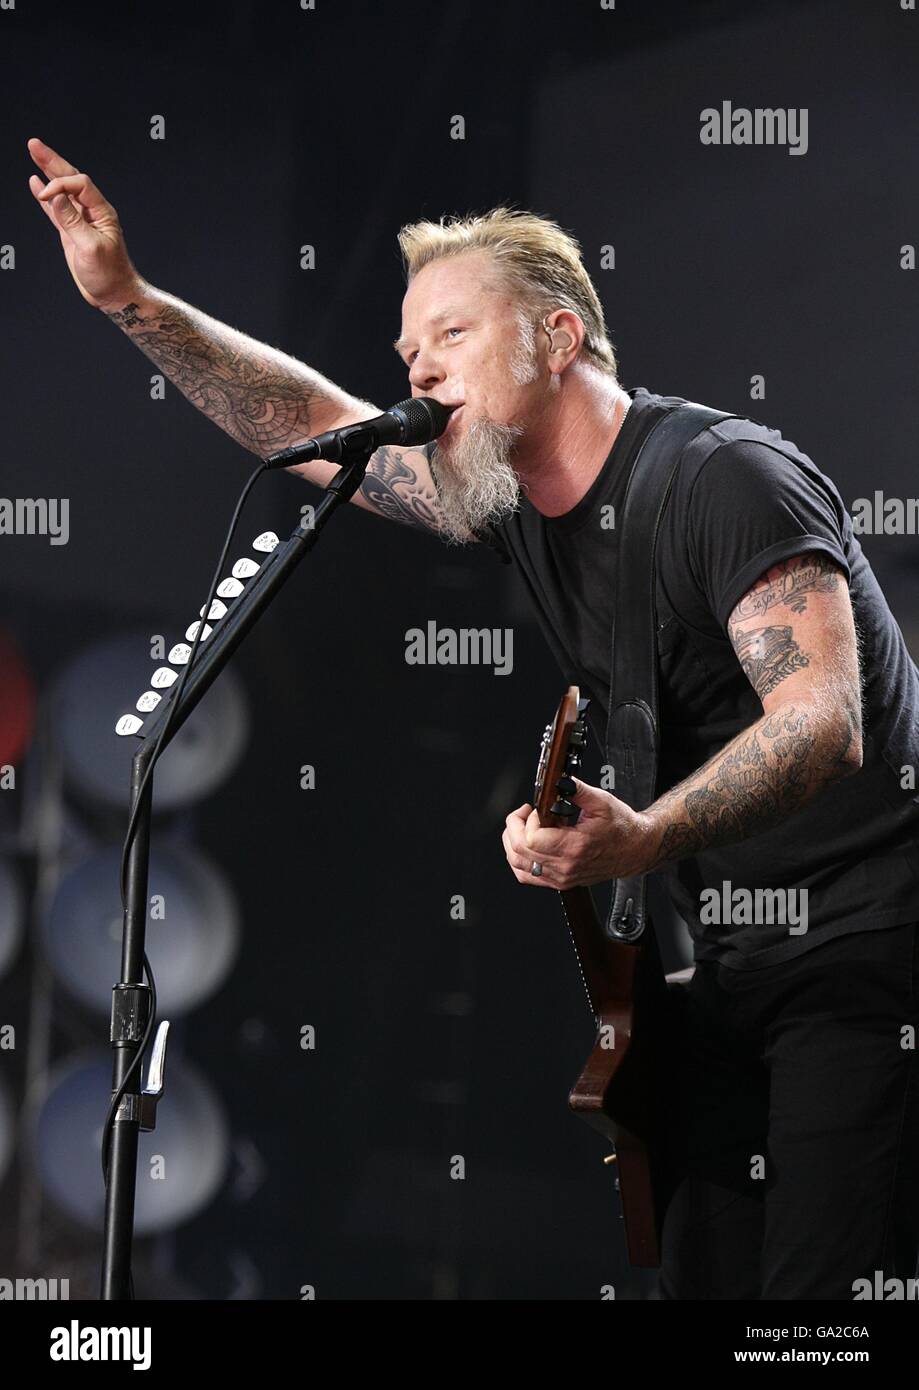 James Hetfield on stage during Metallica's performance at the charity concert at Wembley Stadium, London. Stock Photo